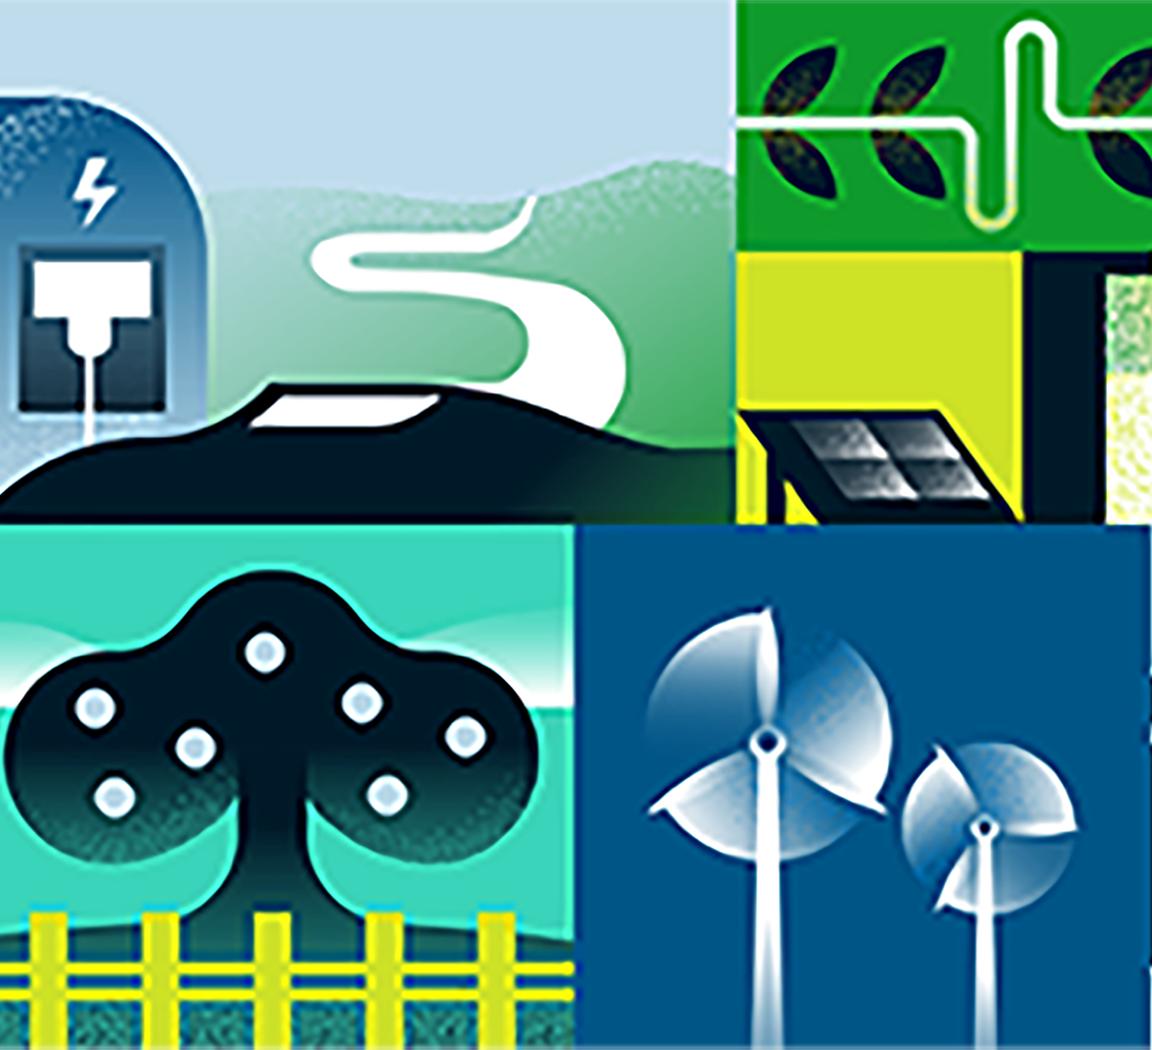 Sustainability Illustrations: electric car; electricity solutions; recycling; agriculture; wind turbines; climate change; eco-friendly products